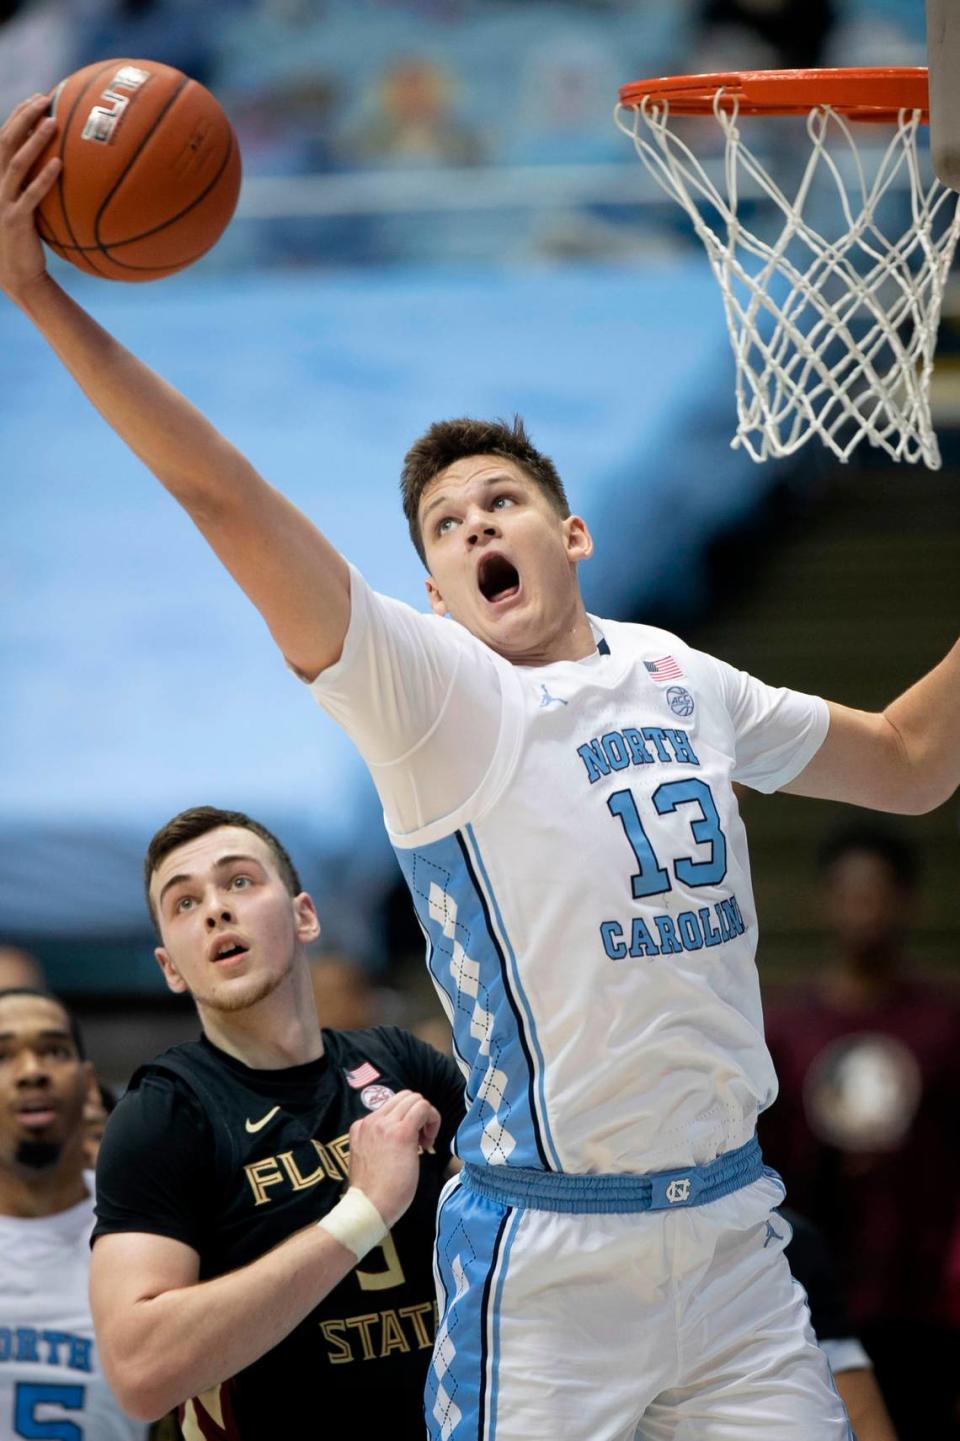 North Carolina’s Walker Kessler (13) secures an offensive rebound over Florida State’s Balsa Koprivica (5) during the first half on Saturday, February 27, 2021 in Chapel Hill, N.C.